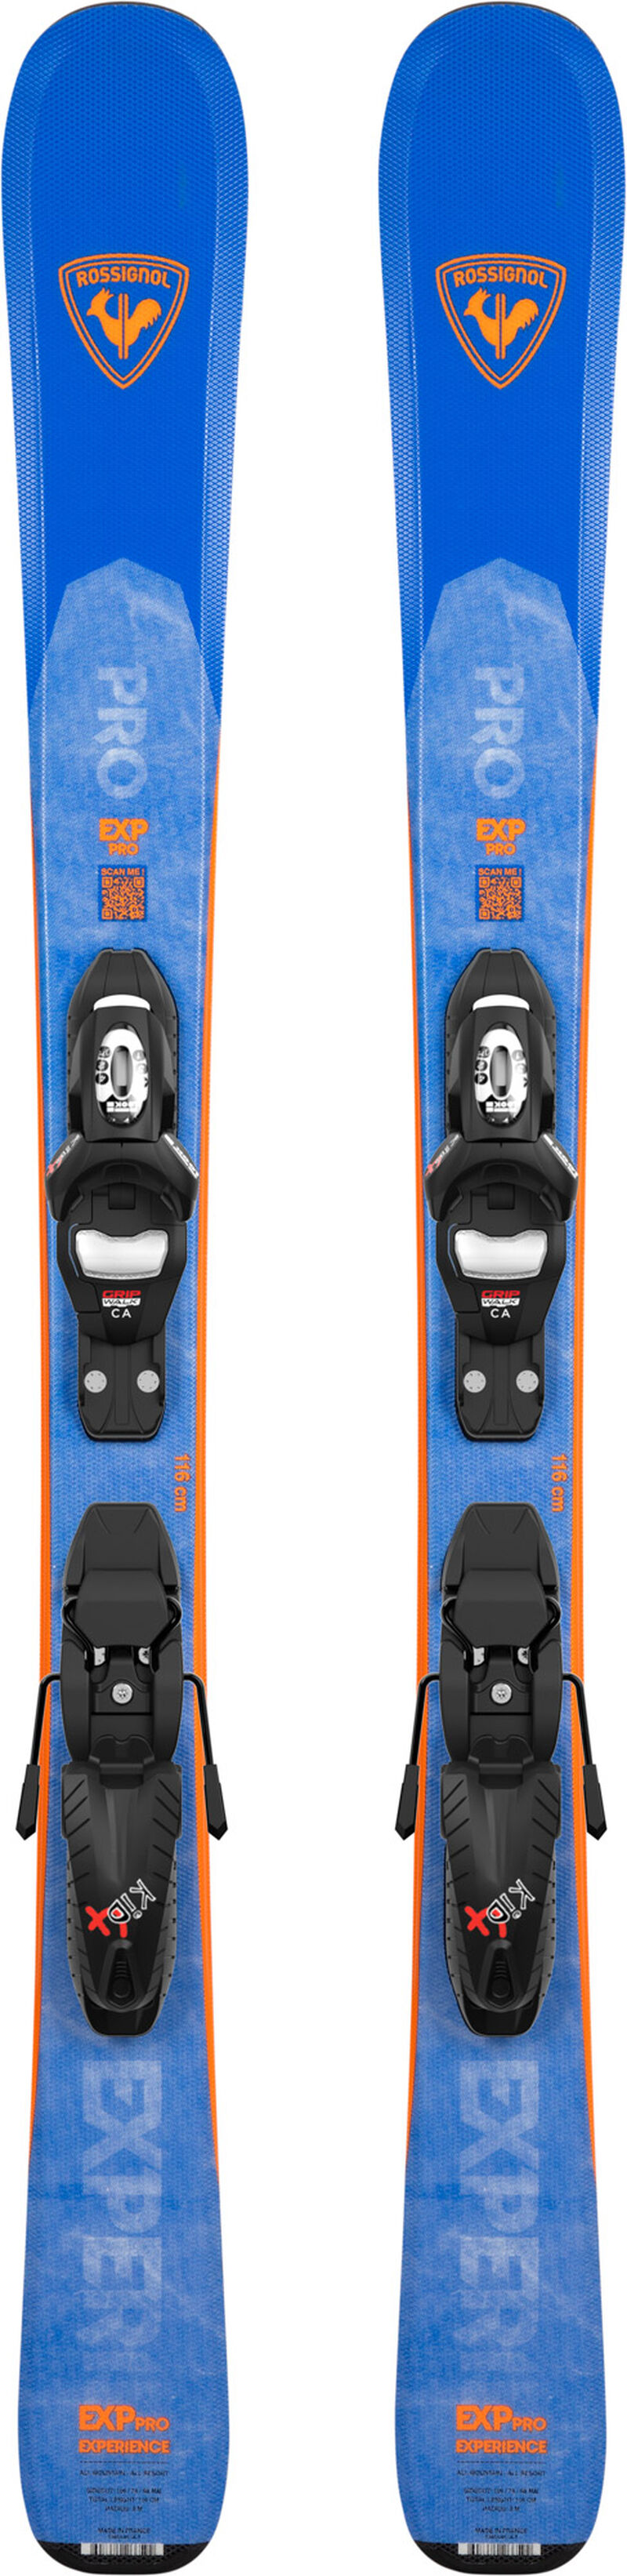 Rossignol Skis All Mountain enfantS EXPERIENCE PRO (KID-X) 